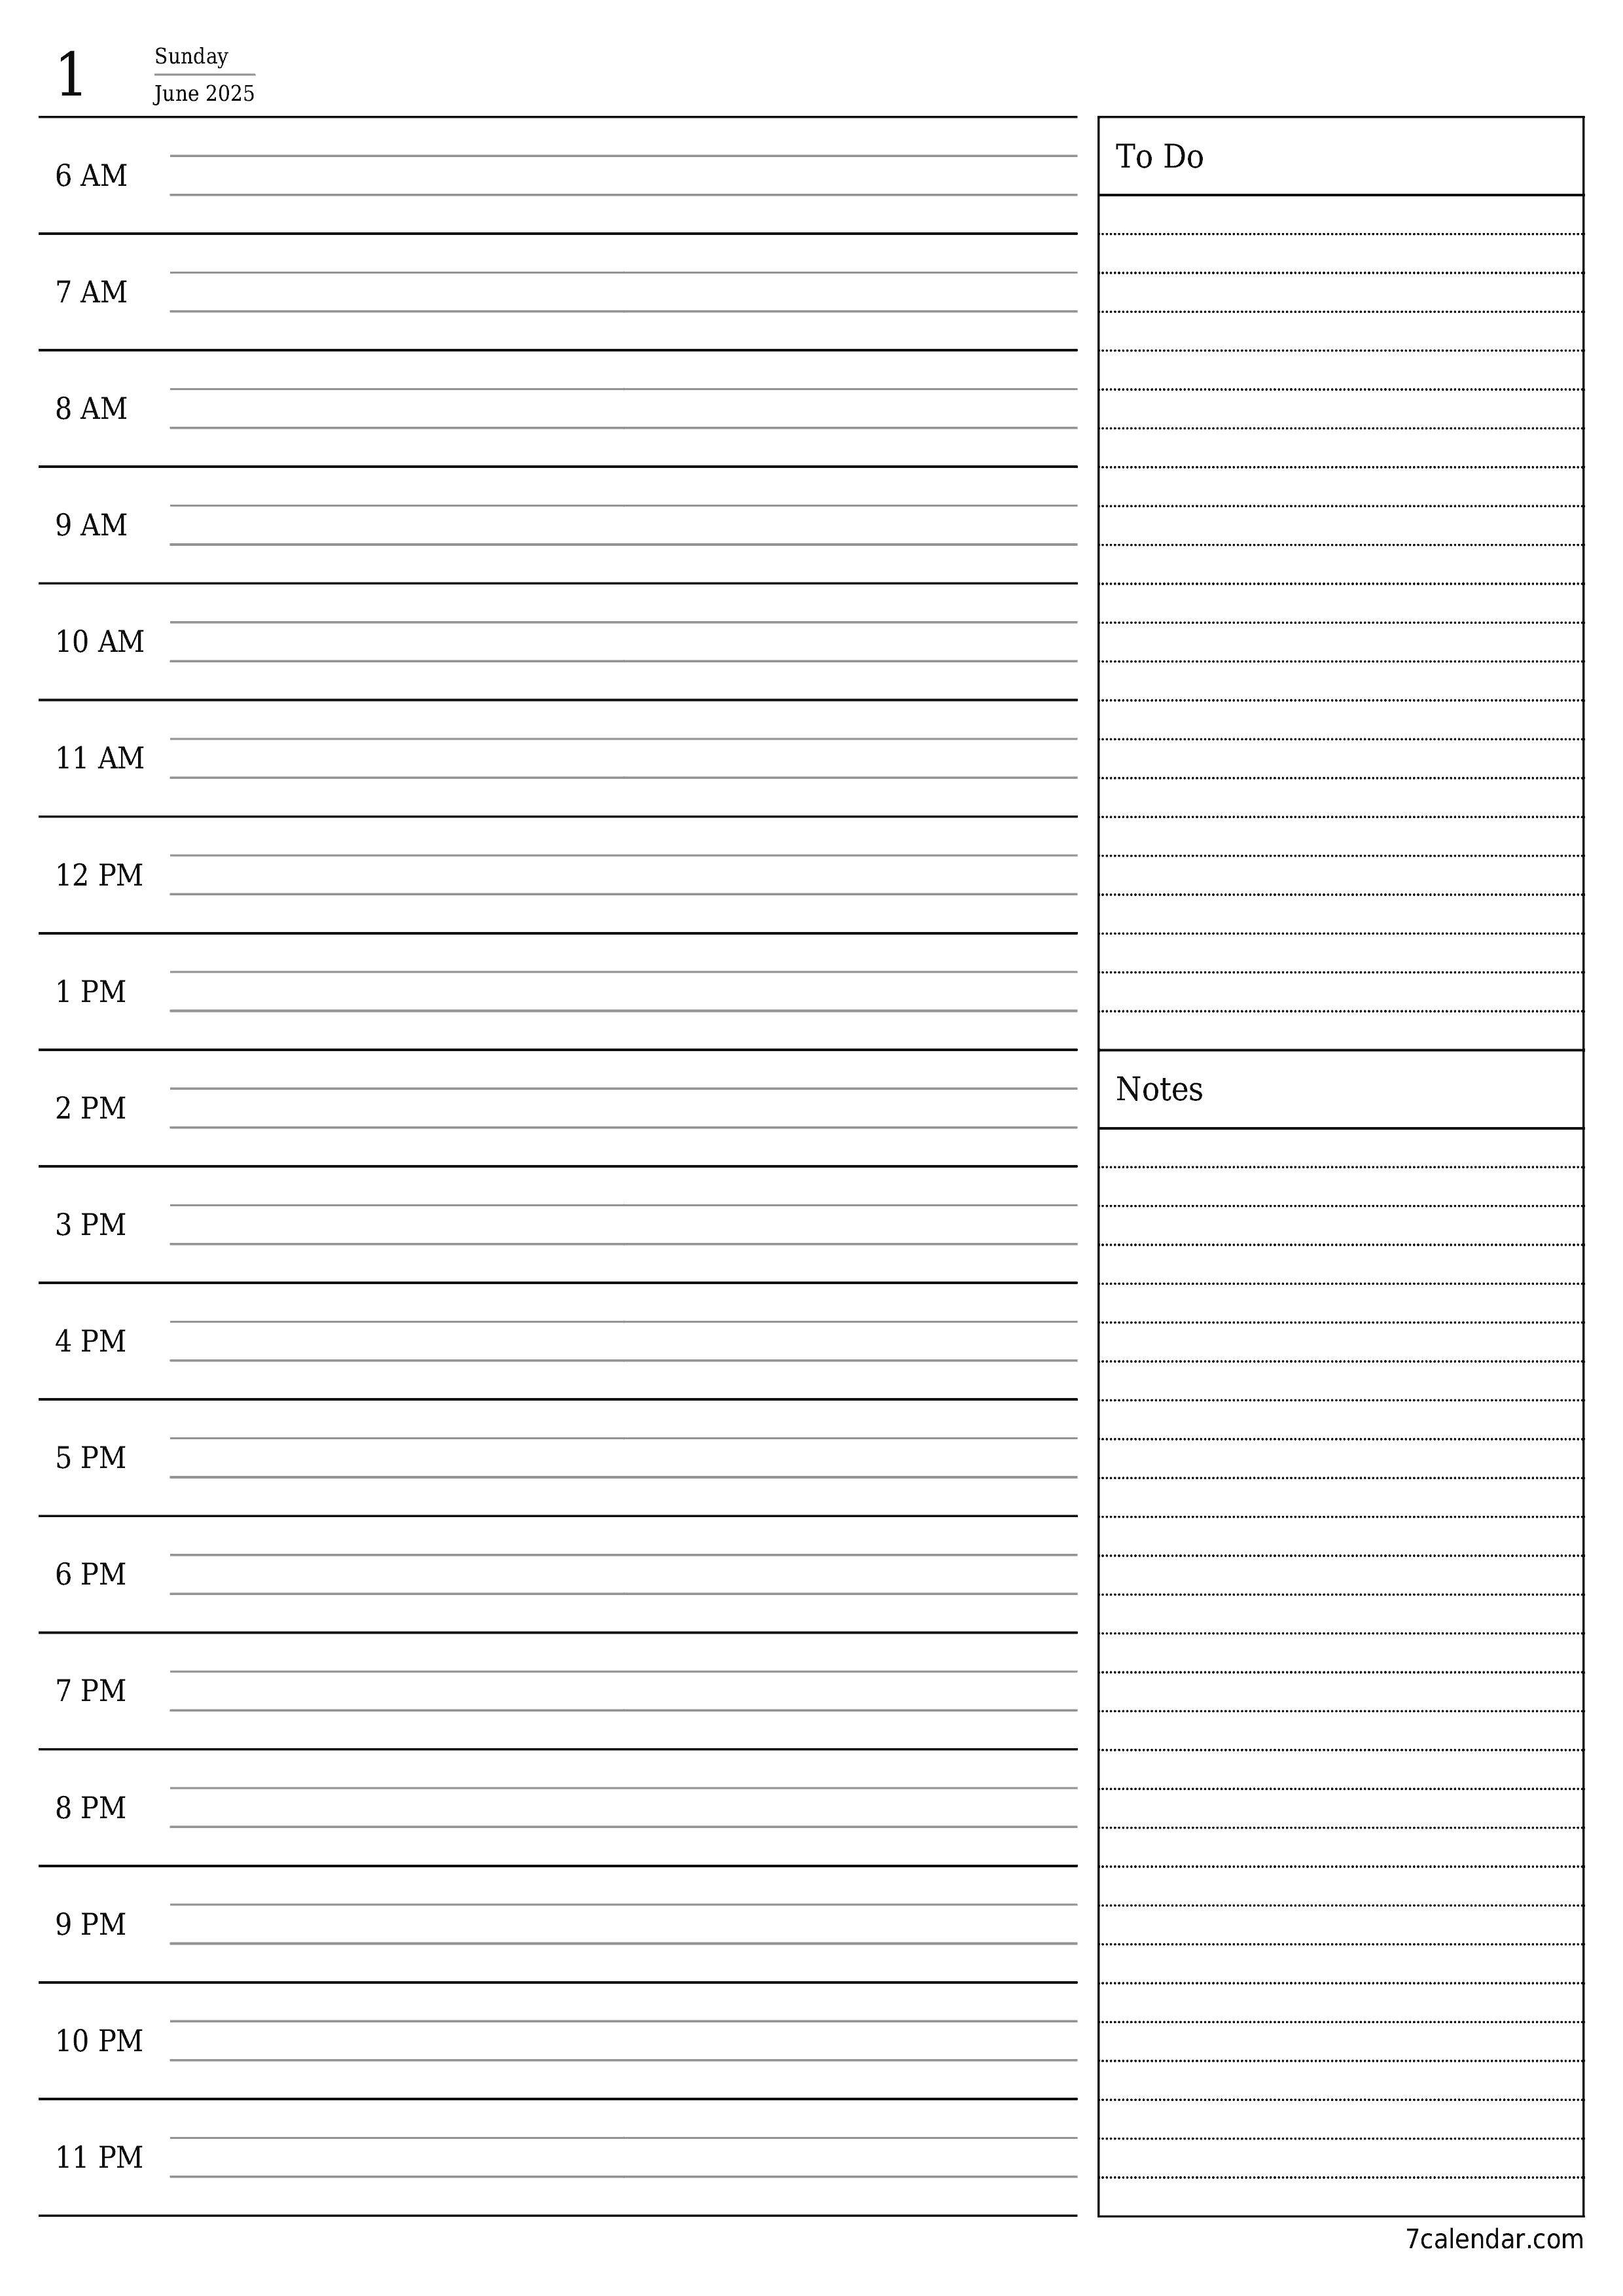 Blank daily printable calendar and planner for day June 2025 with notes, save and print to PDF PNG English